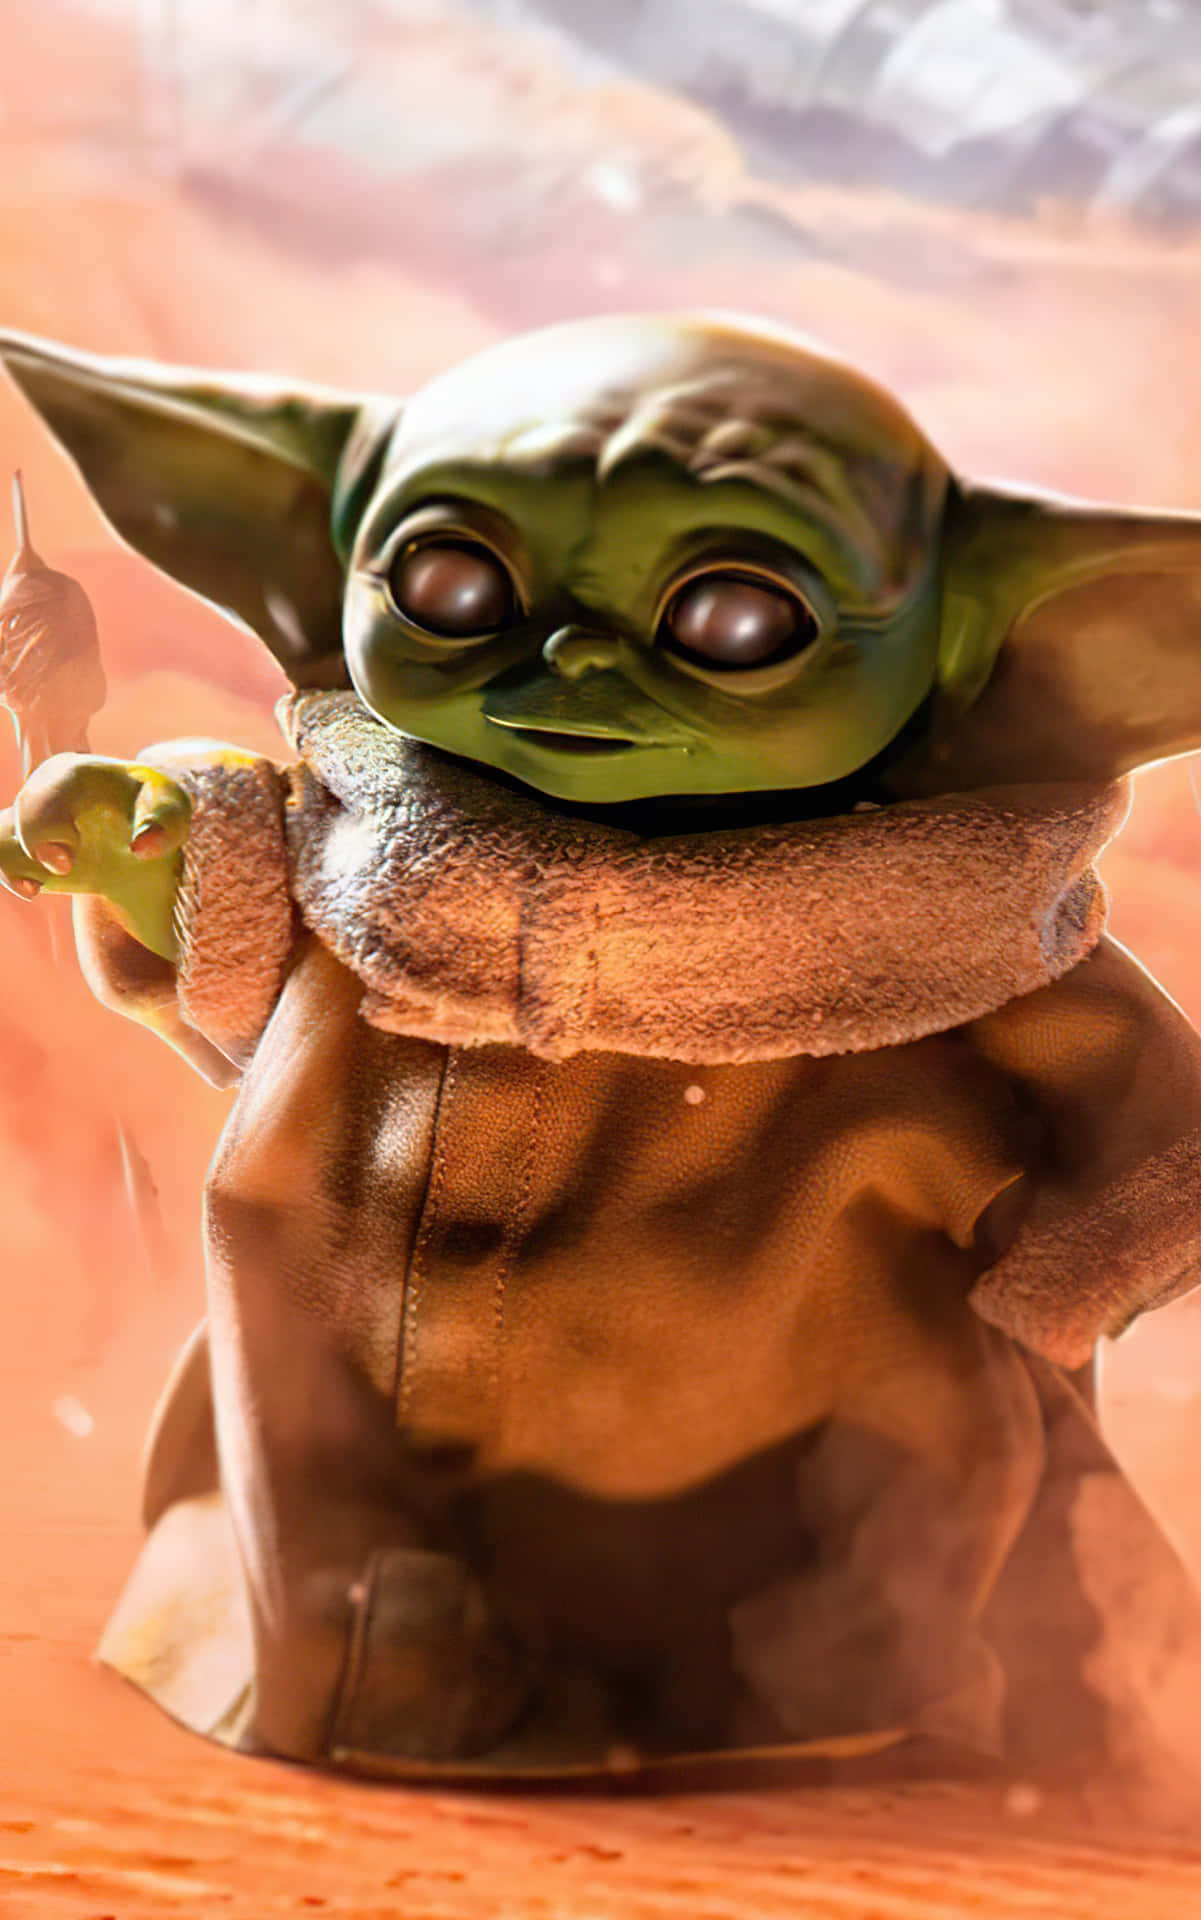 Show off your Star Wars fandom with this custom Baby Yoda phone case. Wallpaper